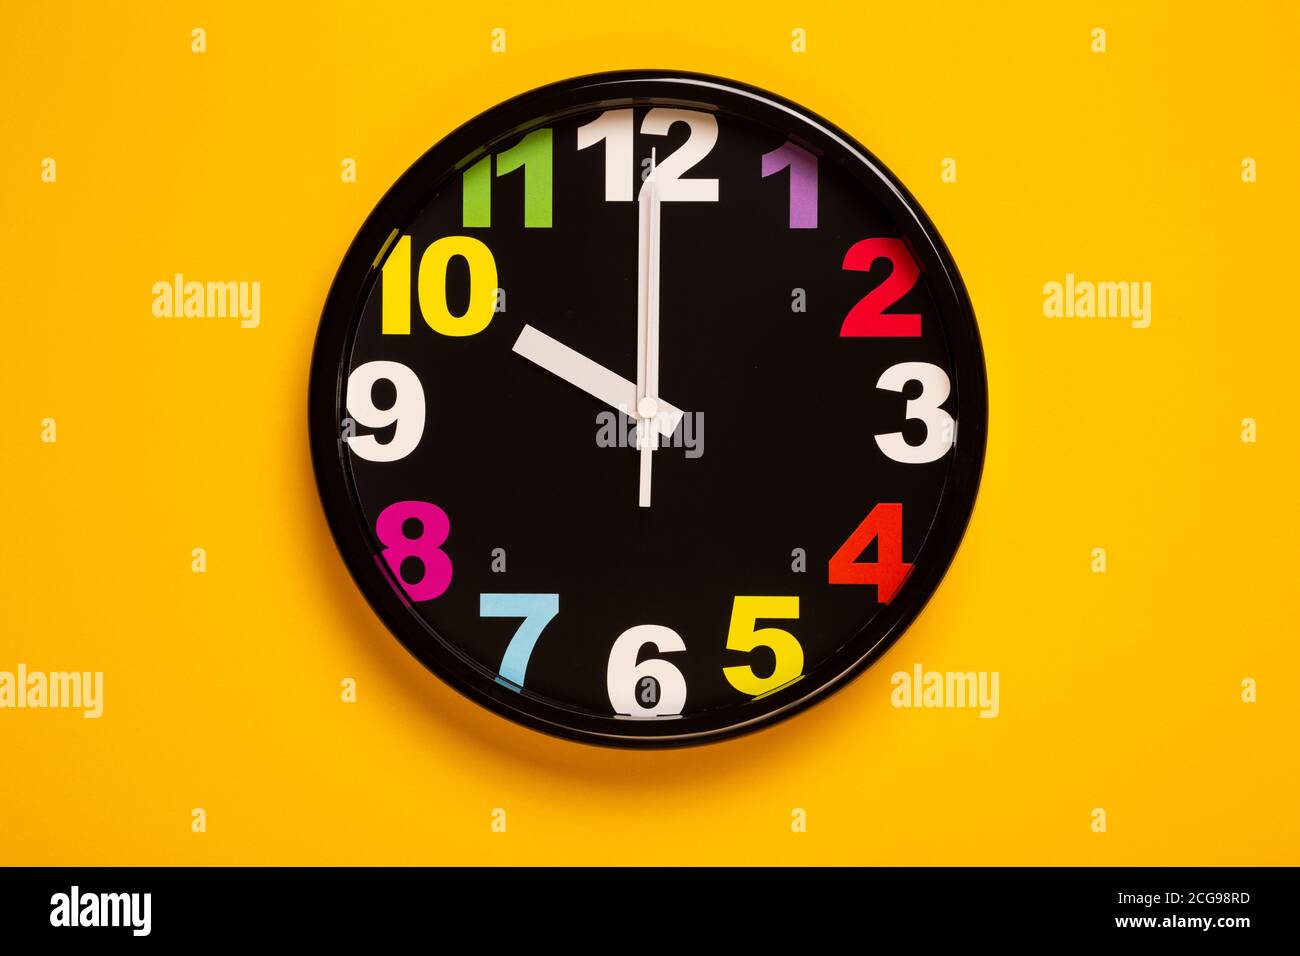 Wall Clock Show Ten O Clock On Marble Texture Office Clock Show 10pm Or 10am Stock Photo Alamy